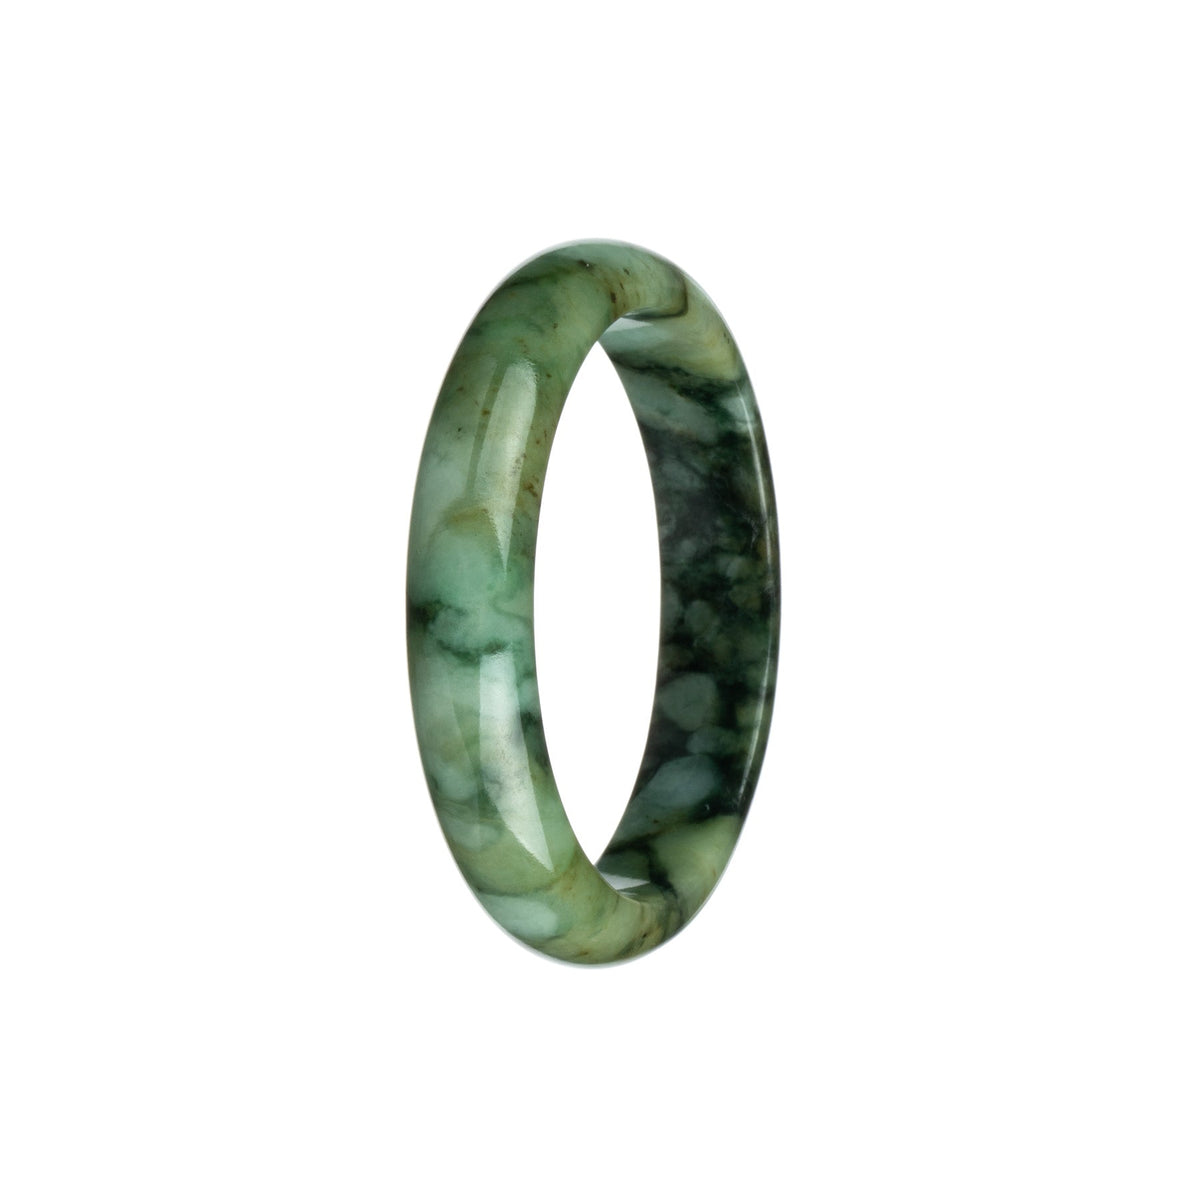 Certified Type A Green and Black Pattern Jade Bangle - 54mm Half Moon